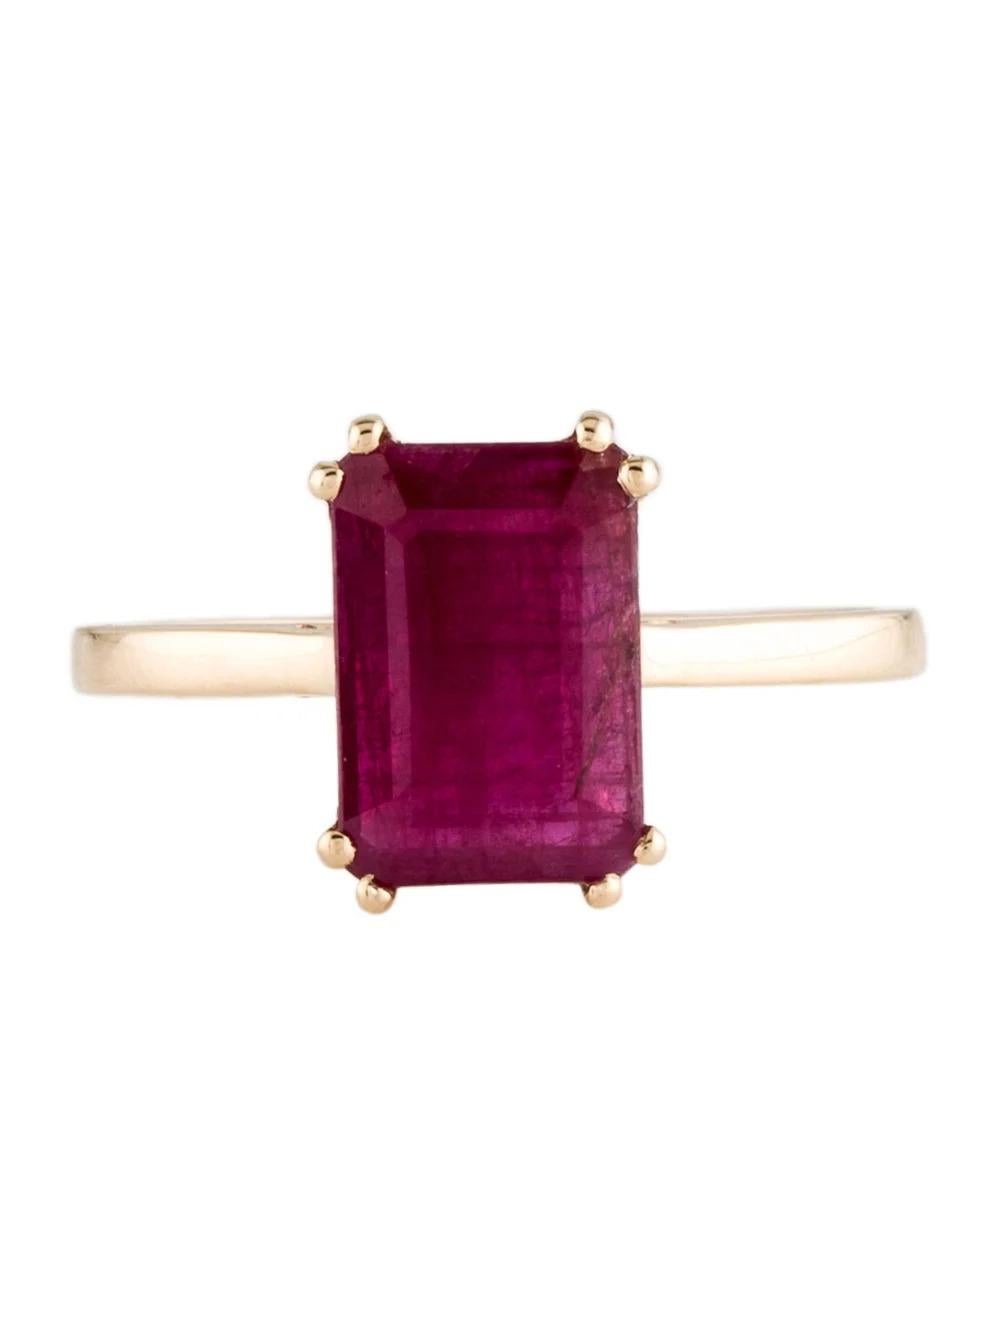 Emerald Cut 14K Ruby Cocktail Ring 1.46ct Size 6.75 - Vintage Style Fine Statement Jewelry For Sale